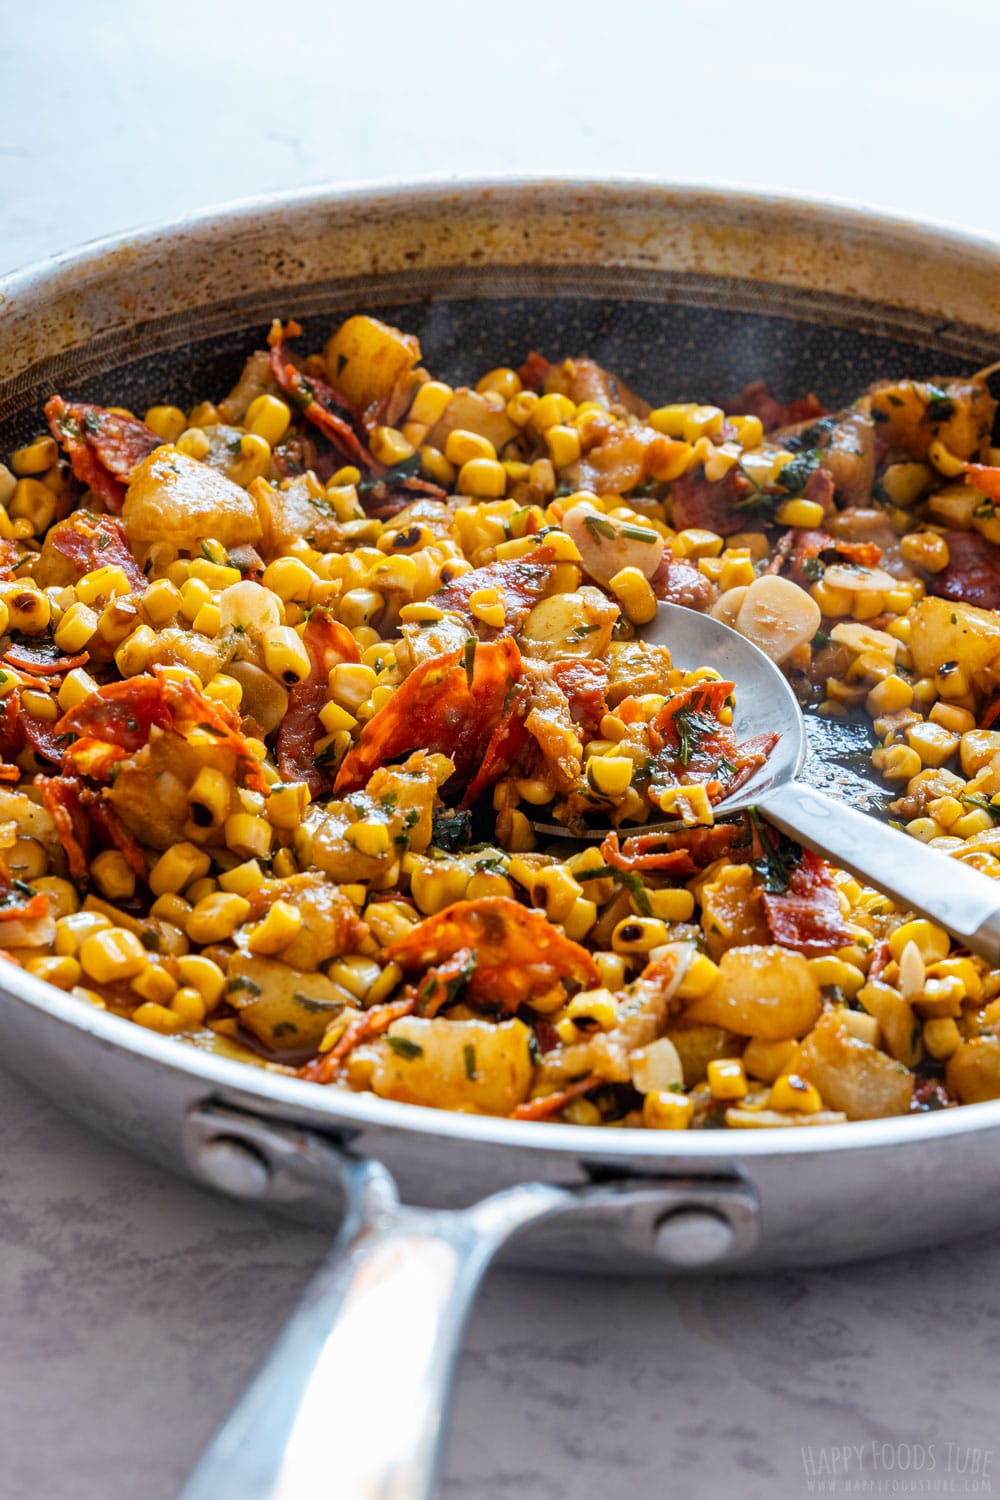 Corn, pears and chorizo on the skillet.